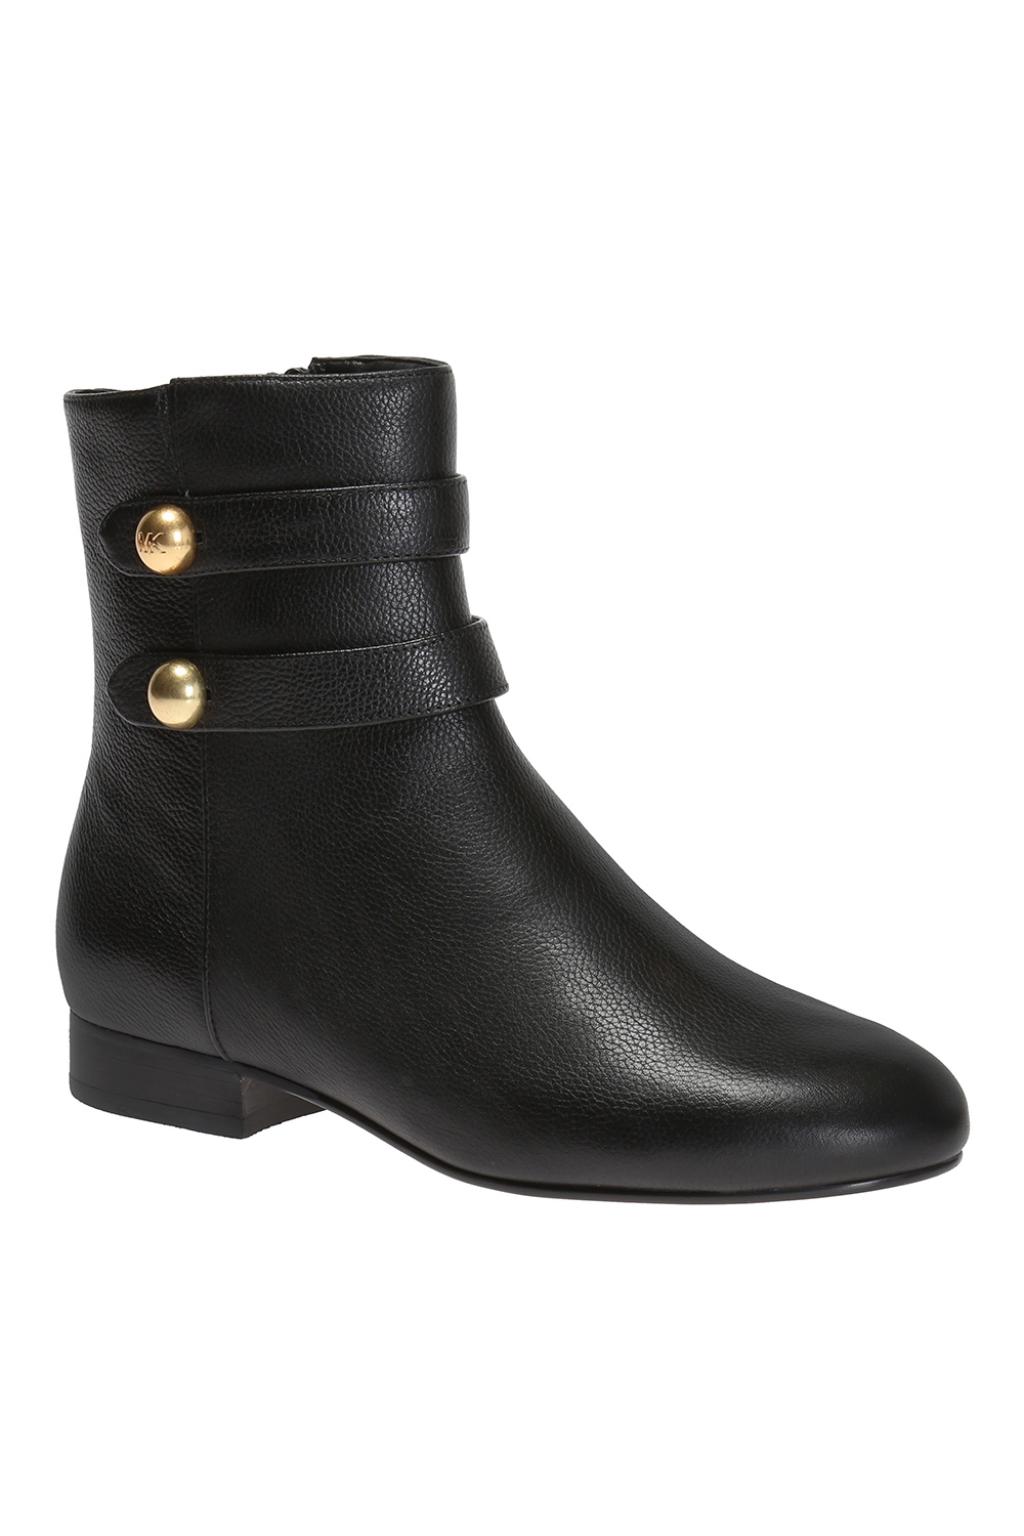 michael kors maisie ankle boots